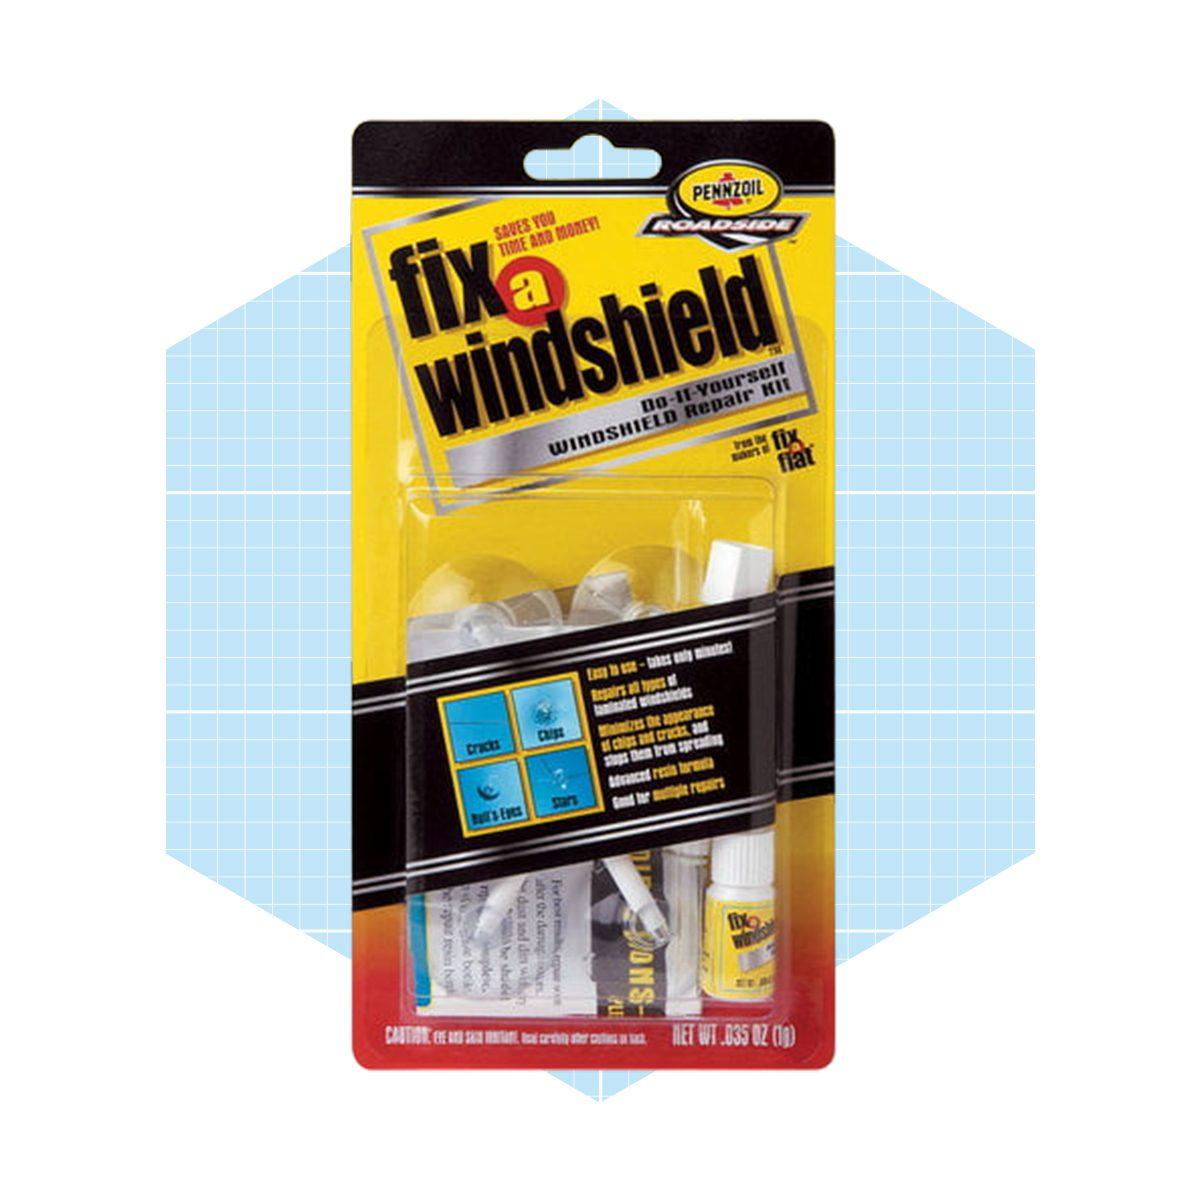 6 Best Windshield Repair Kits to Avoid the Shop